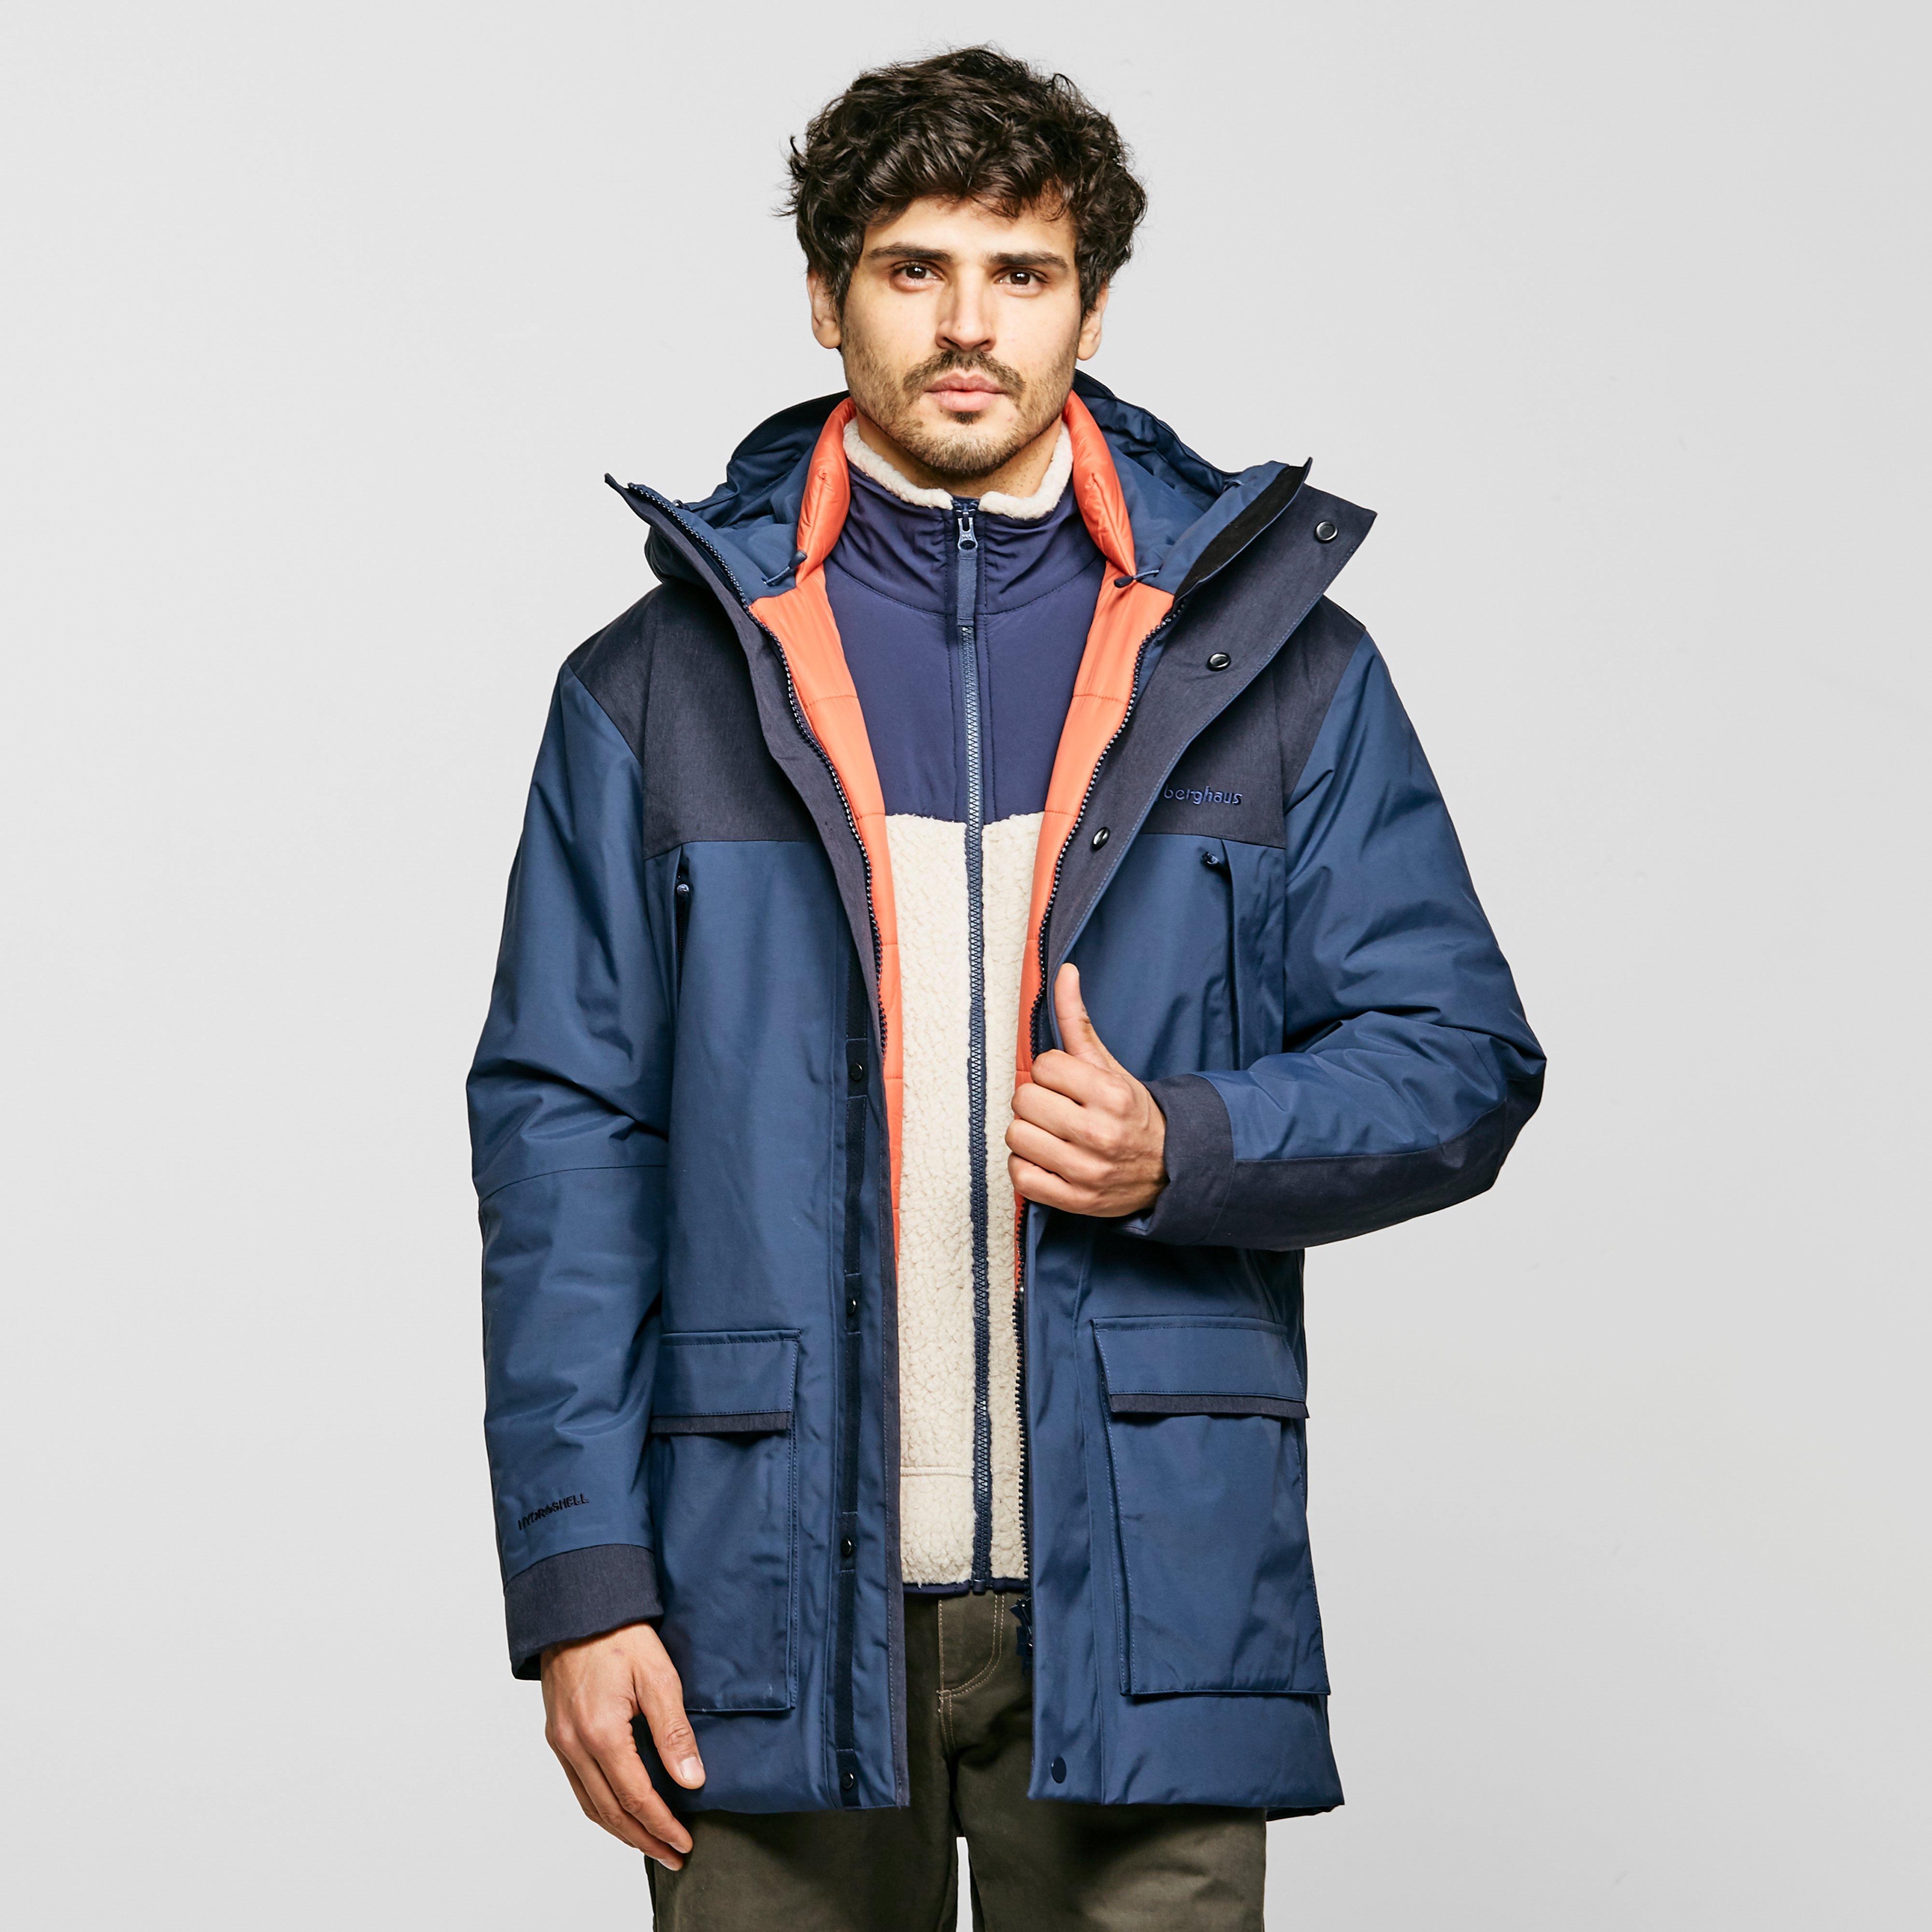 Image of Berghaus Men's Breccan Insulated Parka Jacket - Navy/Dnm, Navy/DNM